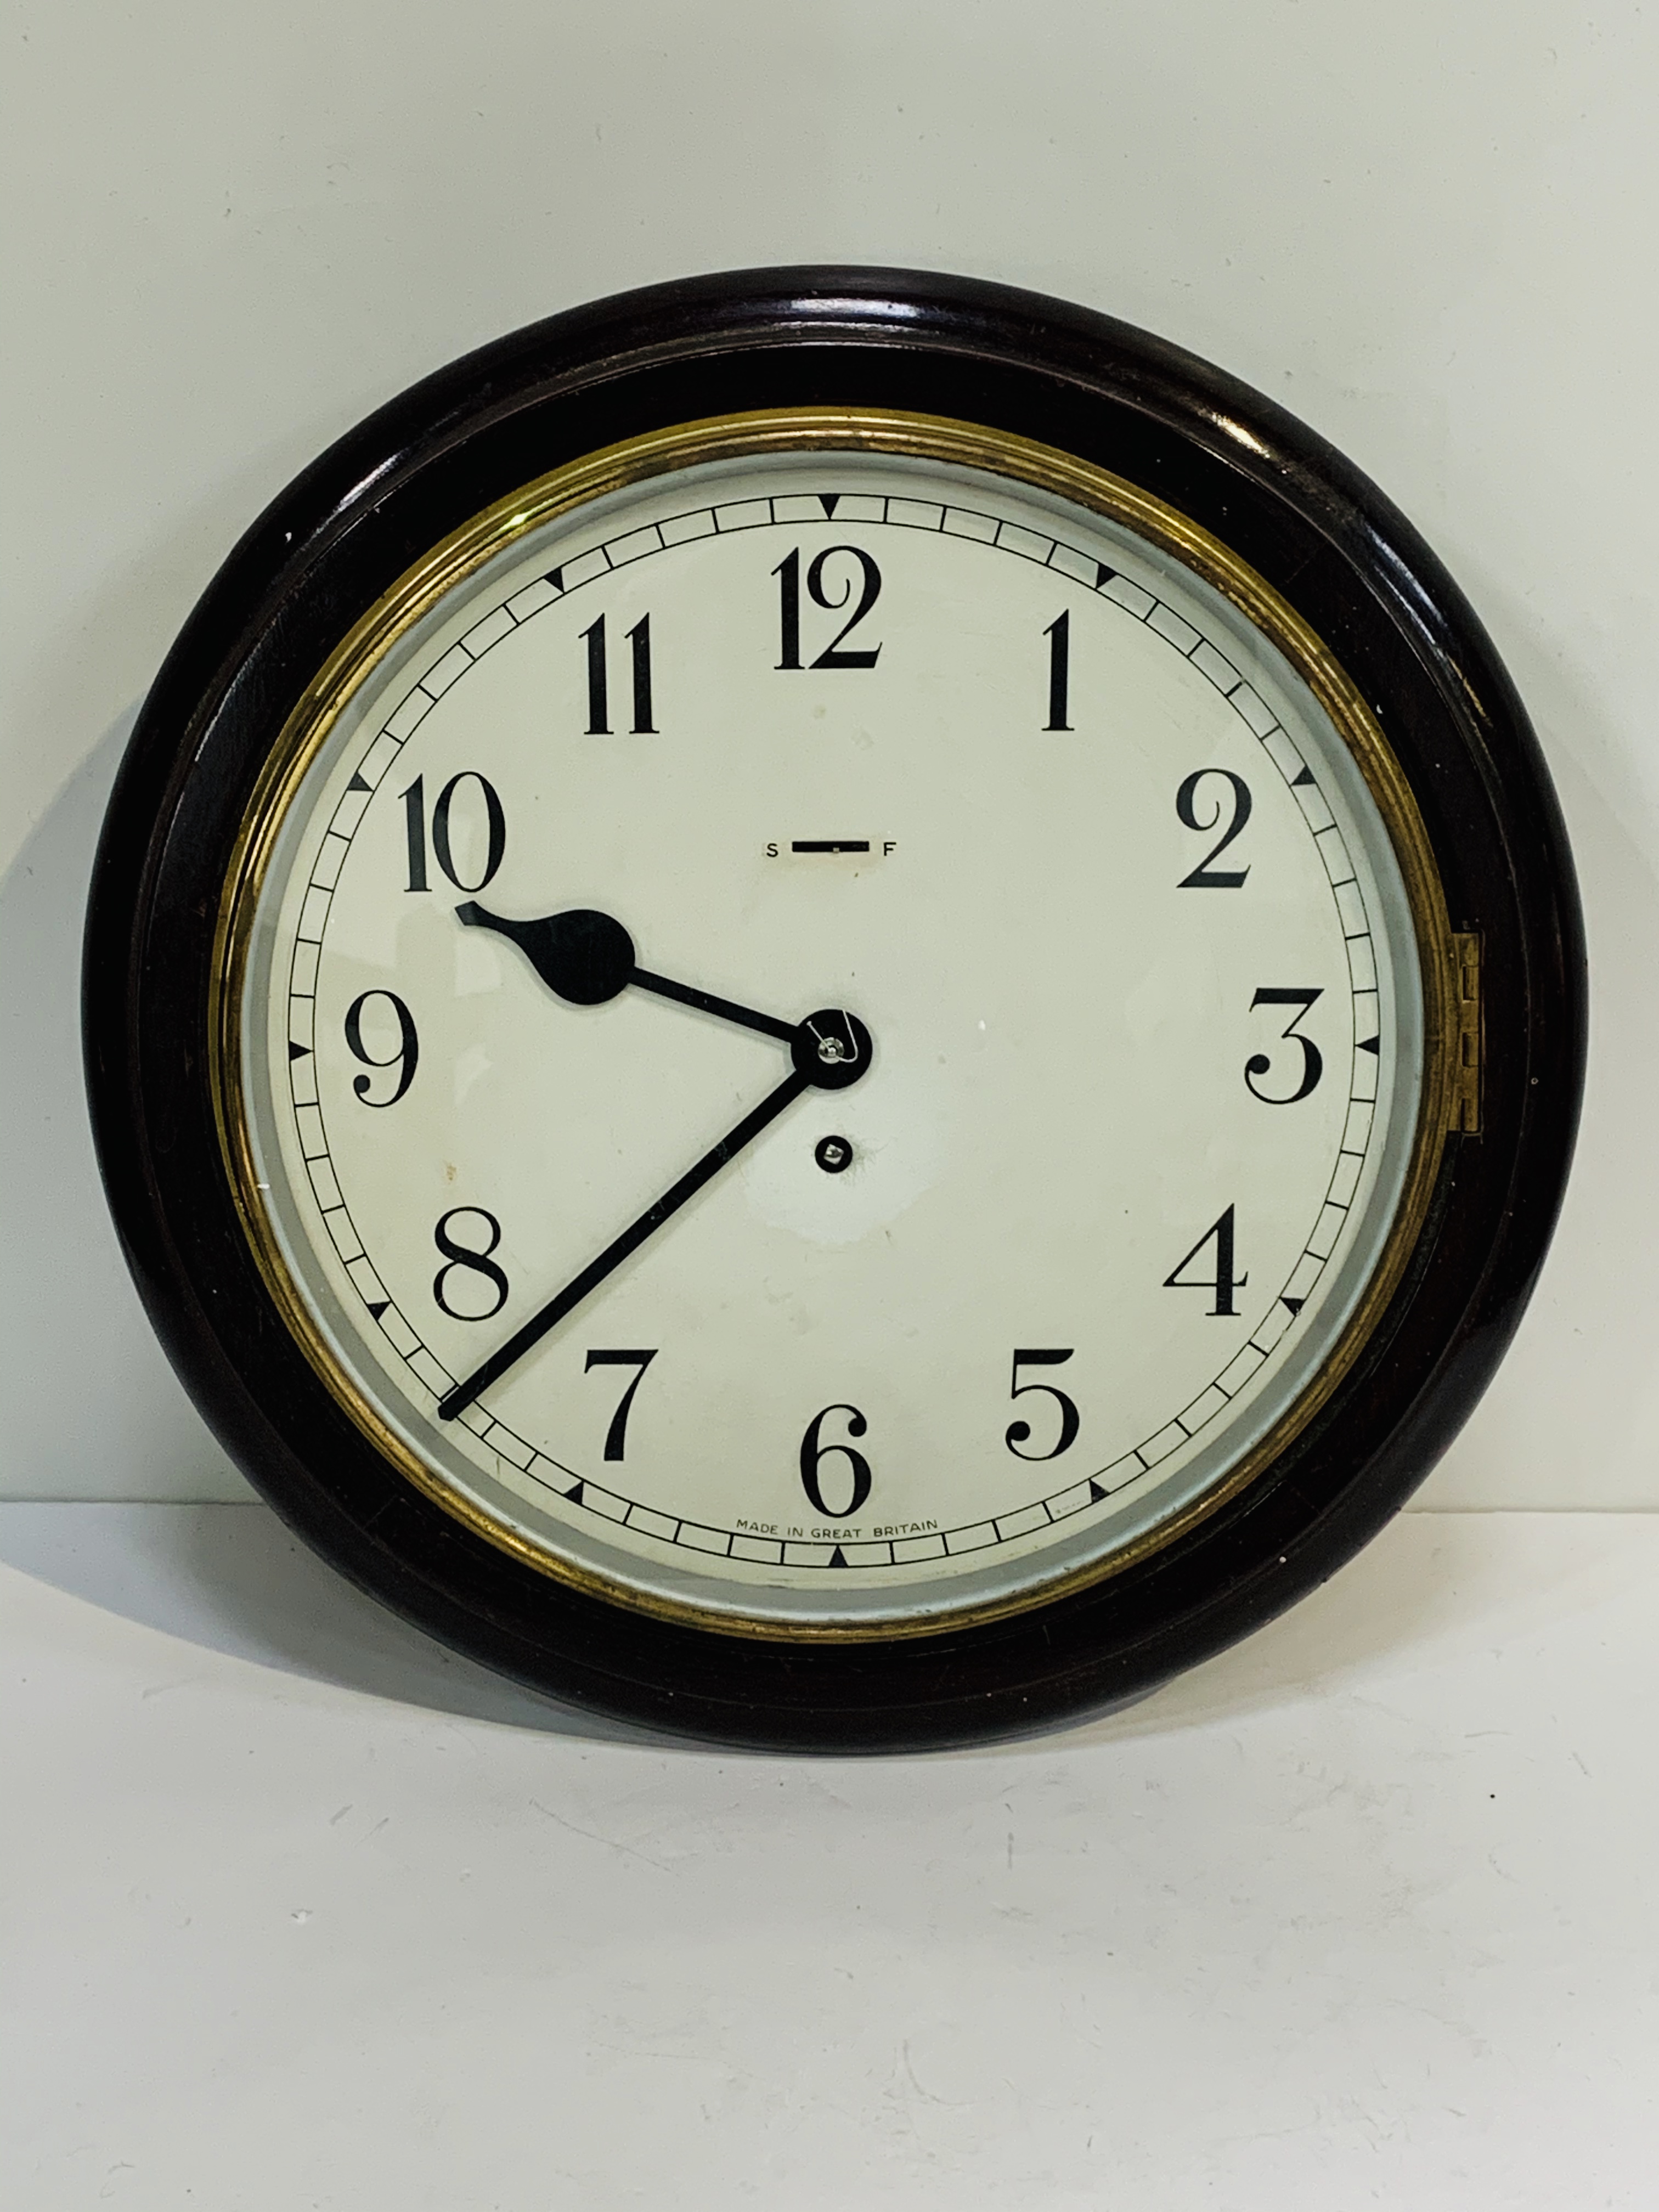 20th century Military issue Smiths Industries 15 inch Dial Wall clock